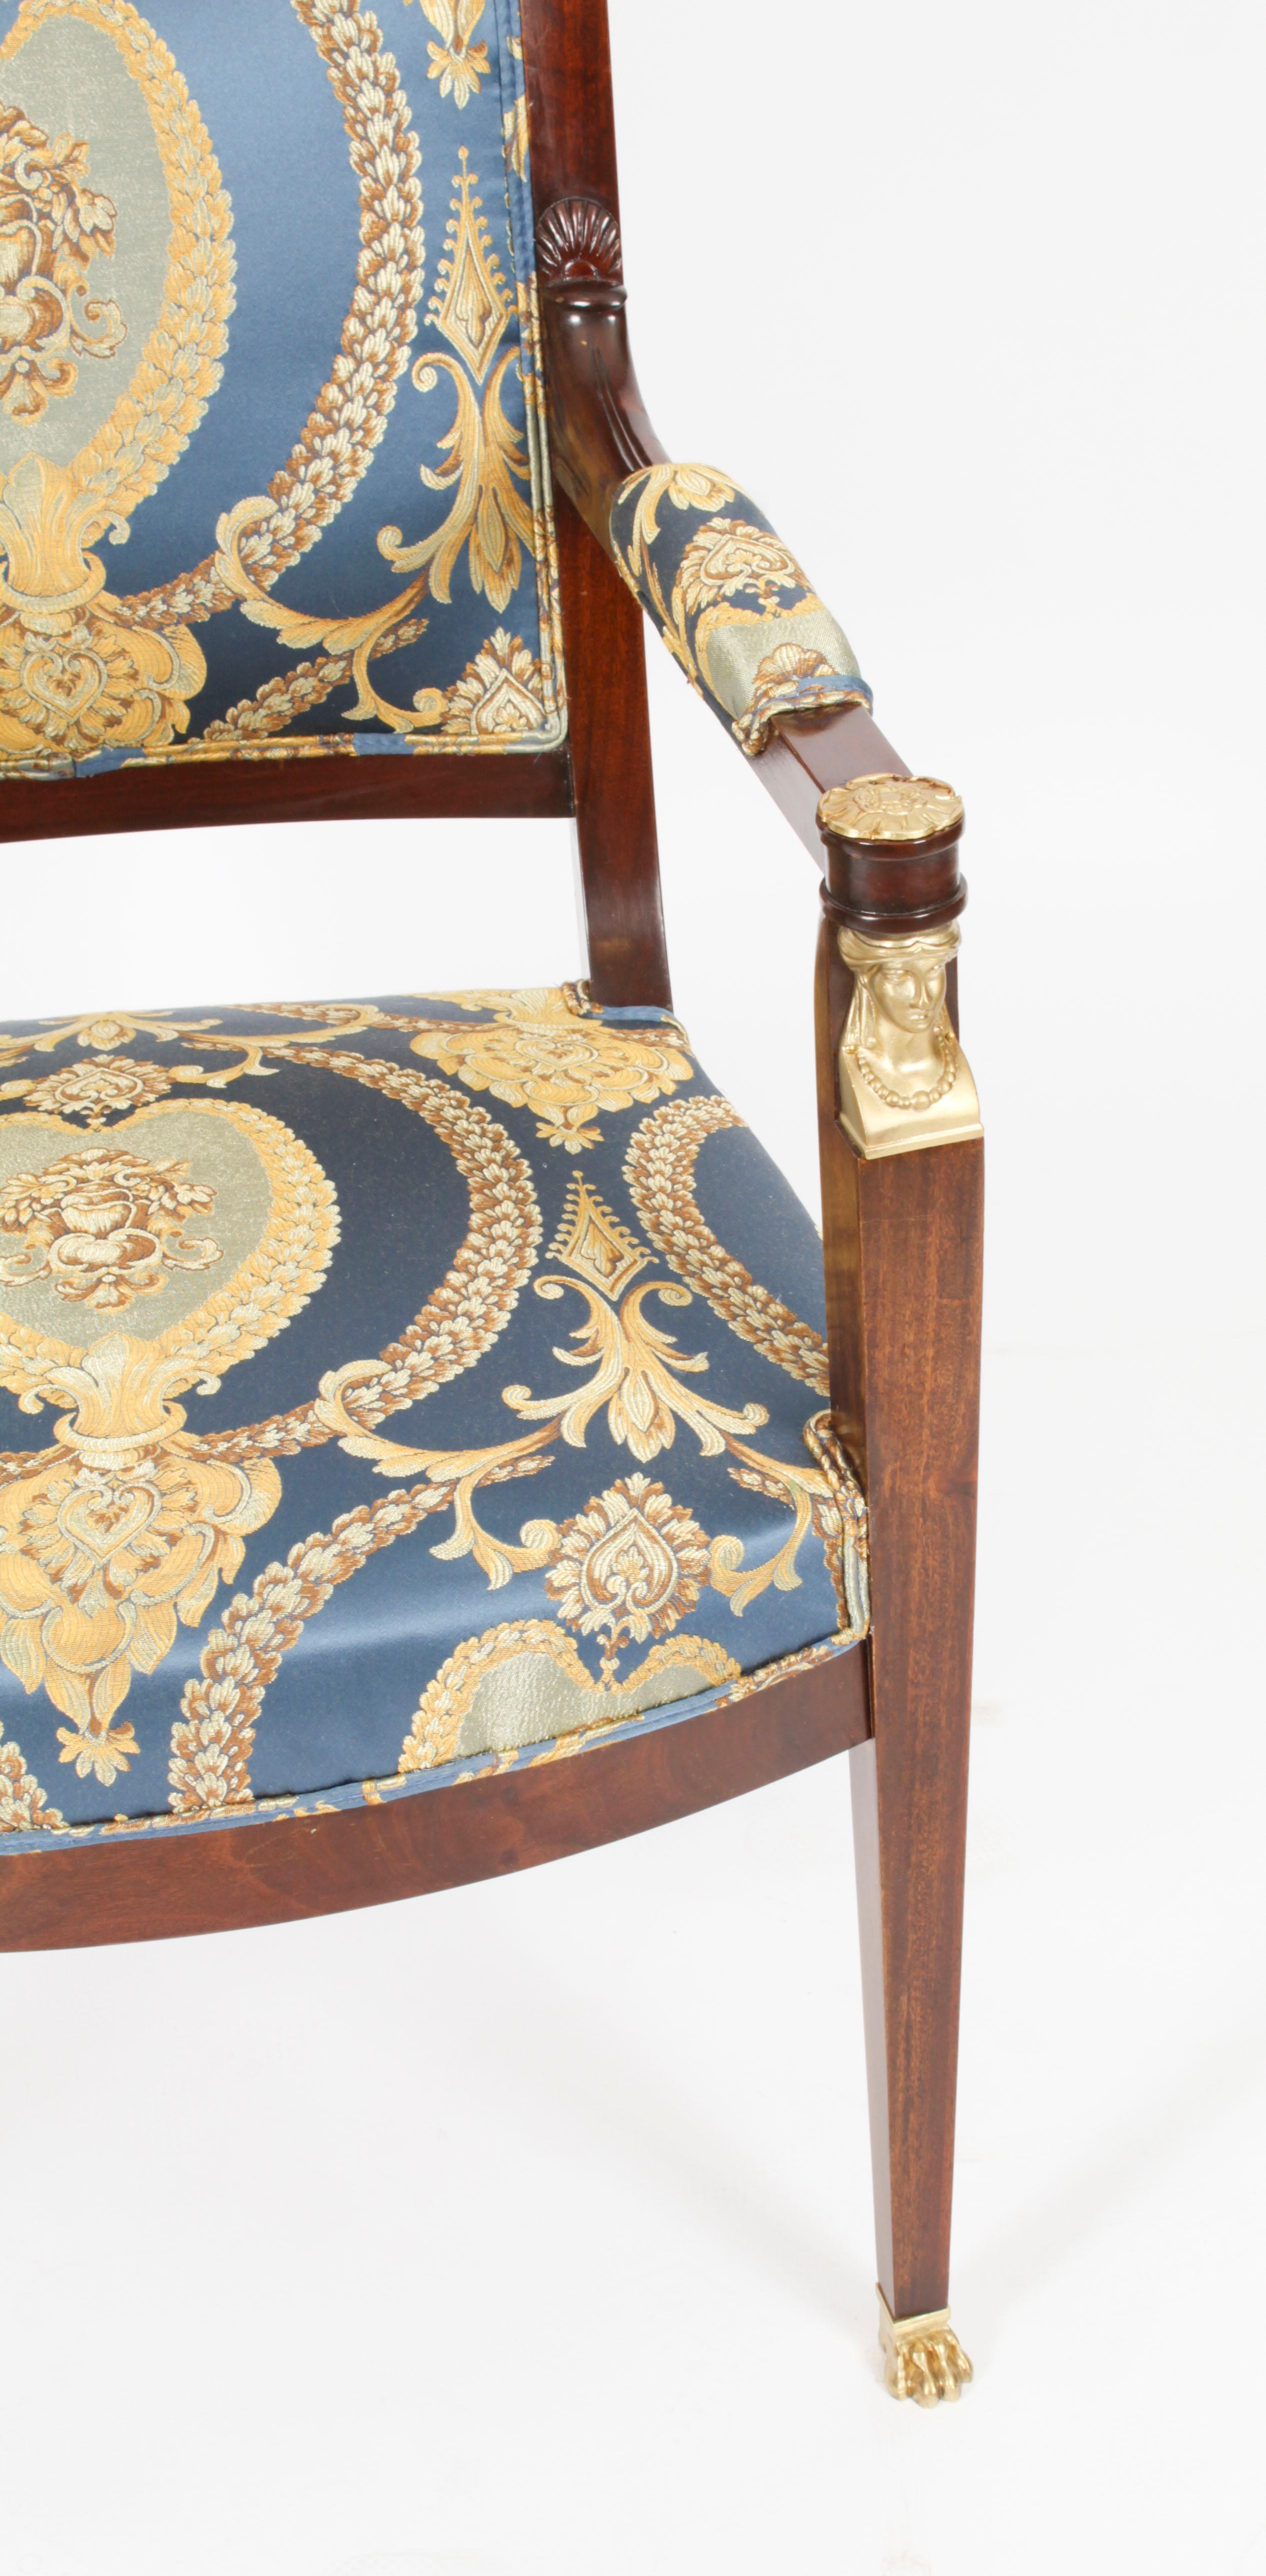 Antique Pair French Empire Revival Ormolu Mounted Armchairs 1870s 19th Century For Sale 2